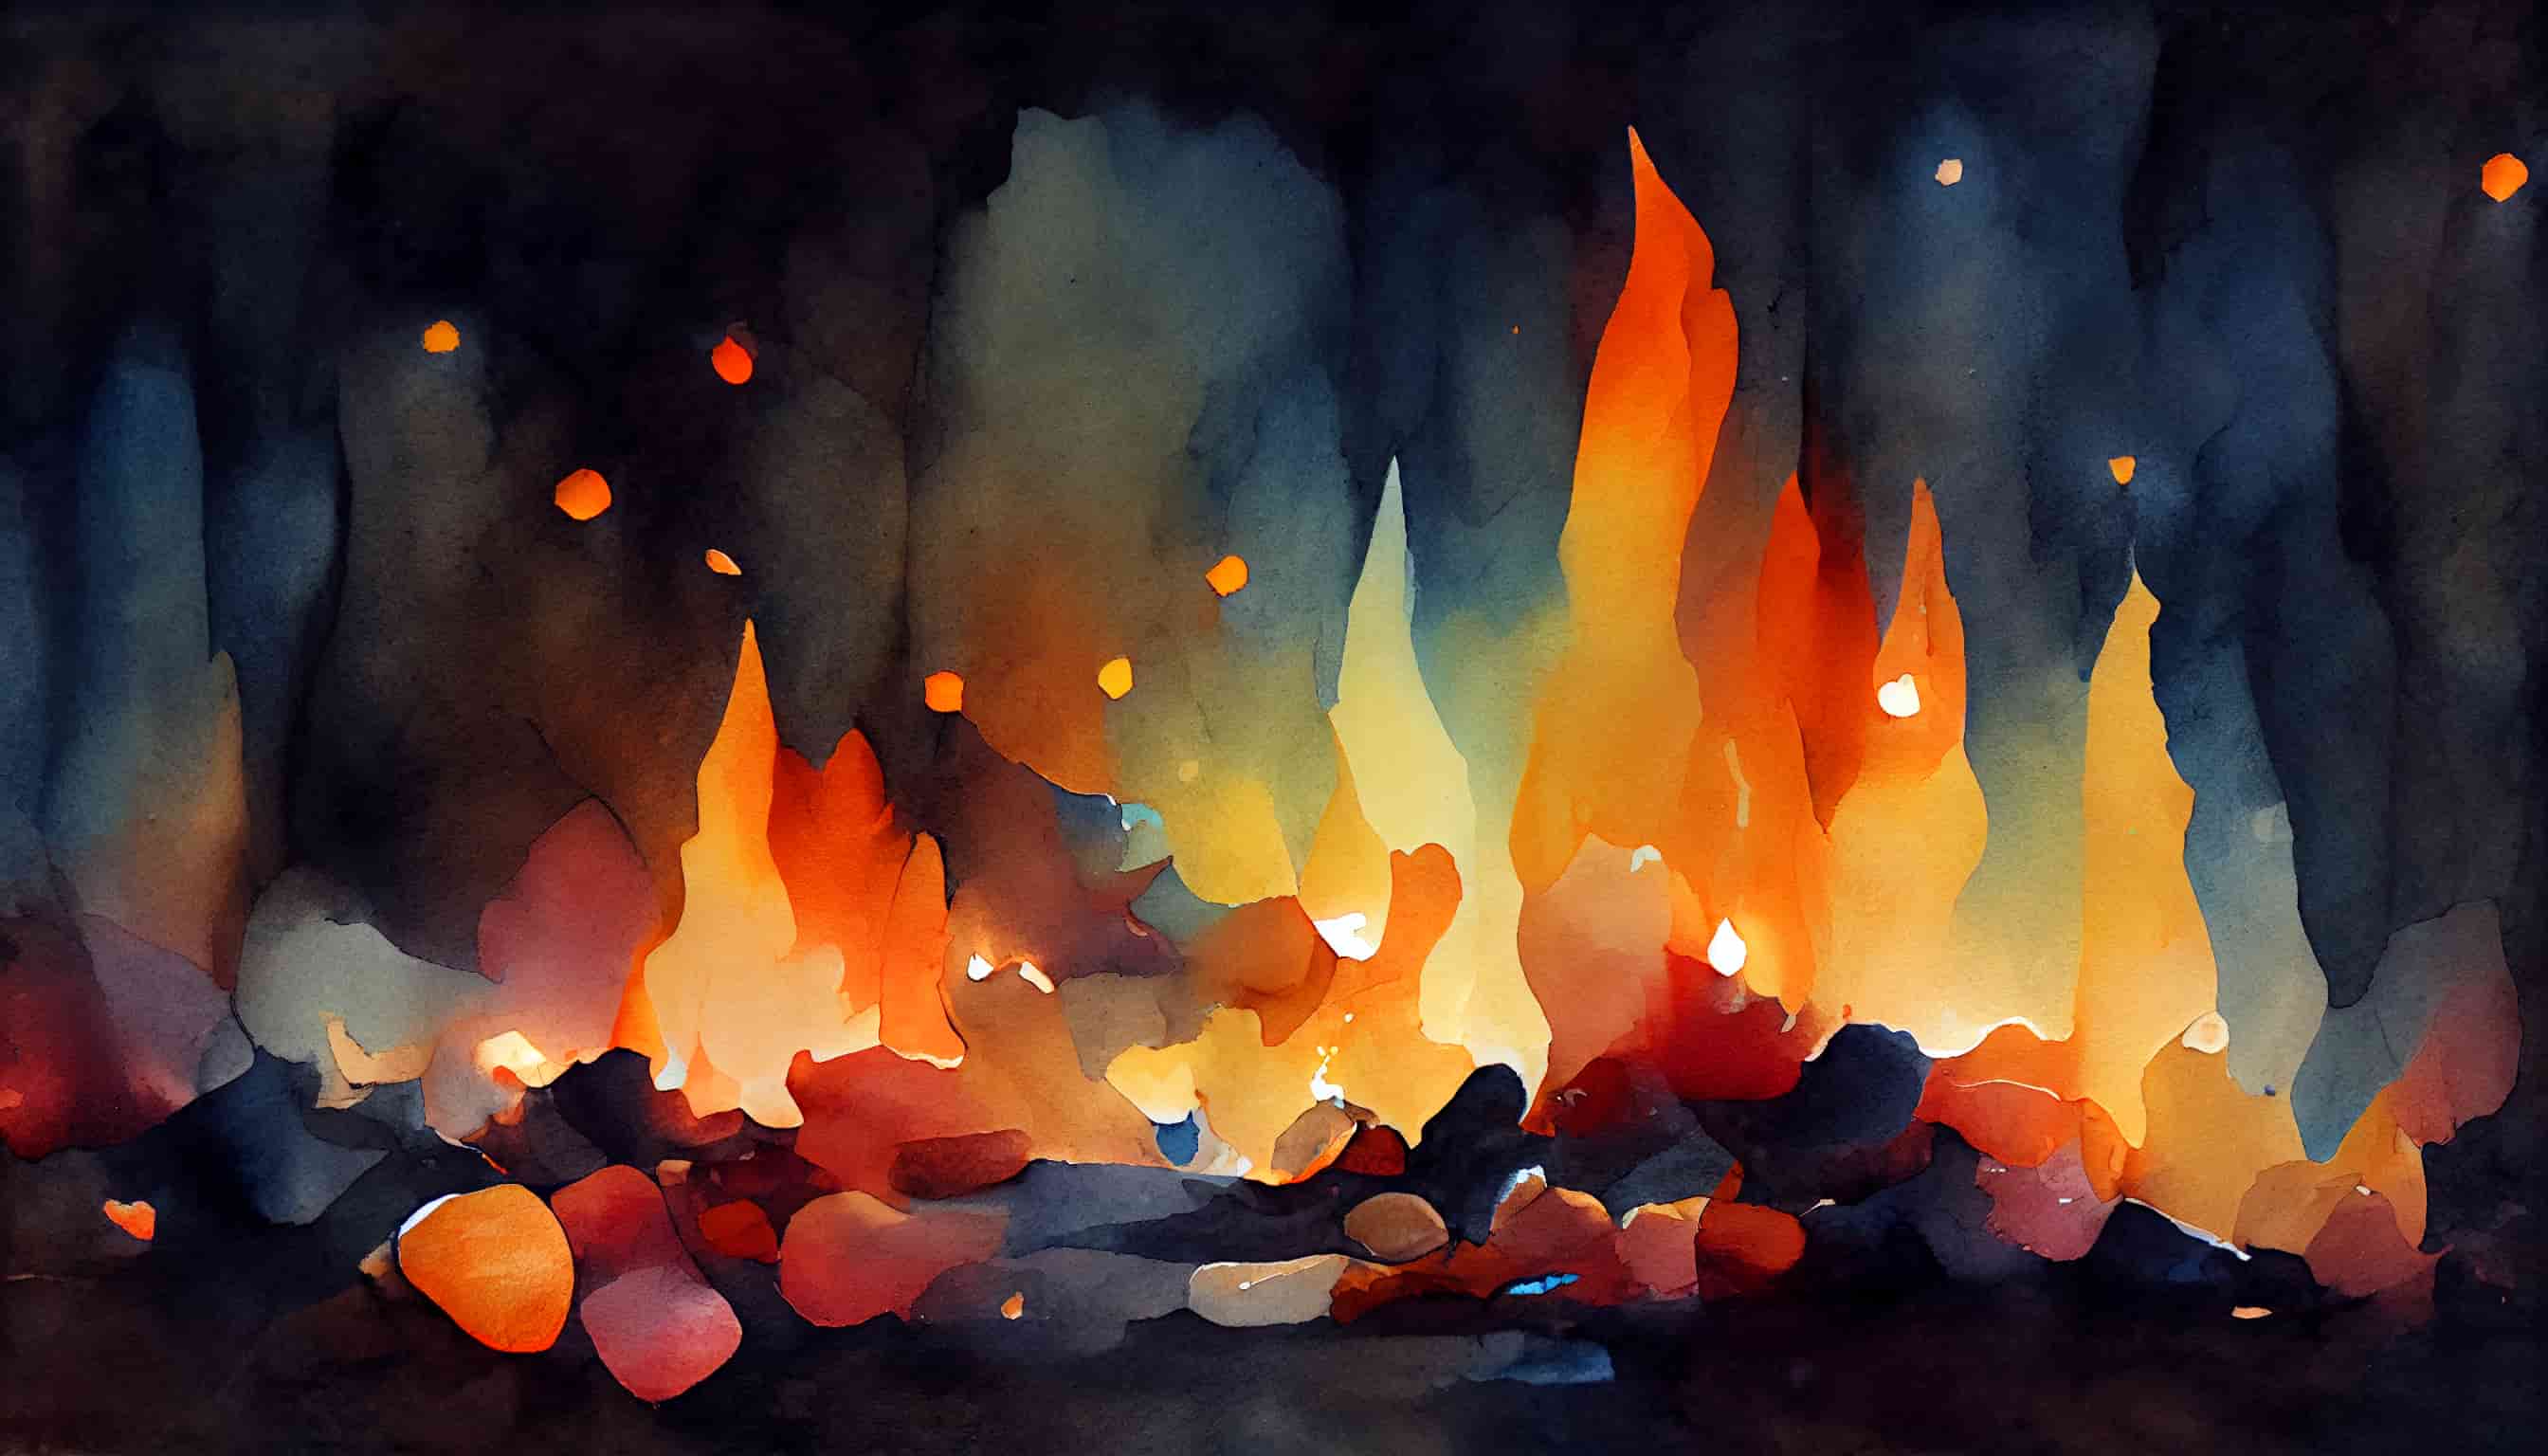 watercolor glowing embers from a fire